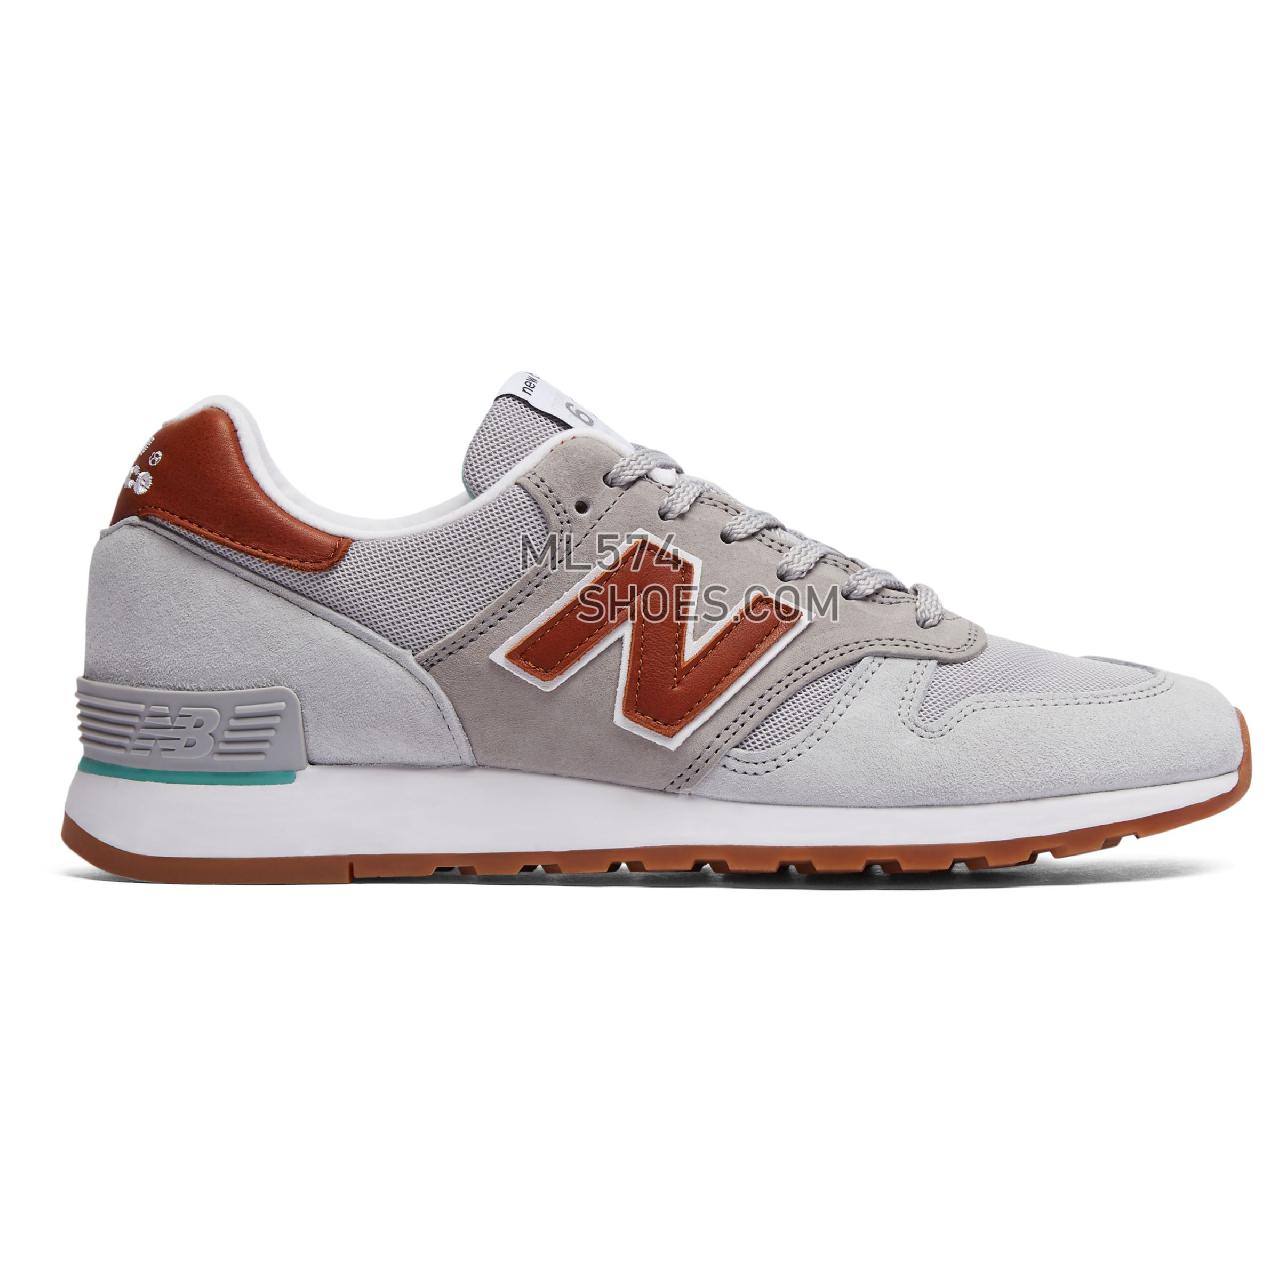 New Balance MADE in UK 670 - Men's Made in USA And UK Sneakers - Grey with Brown - M670GTW